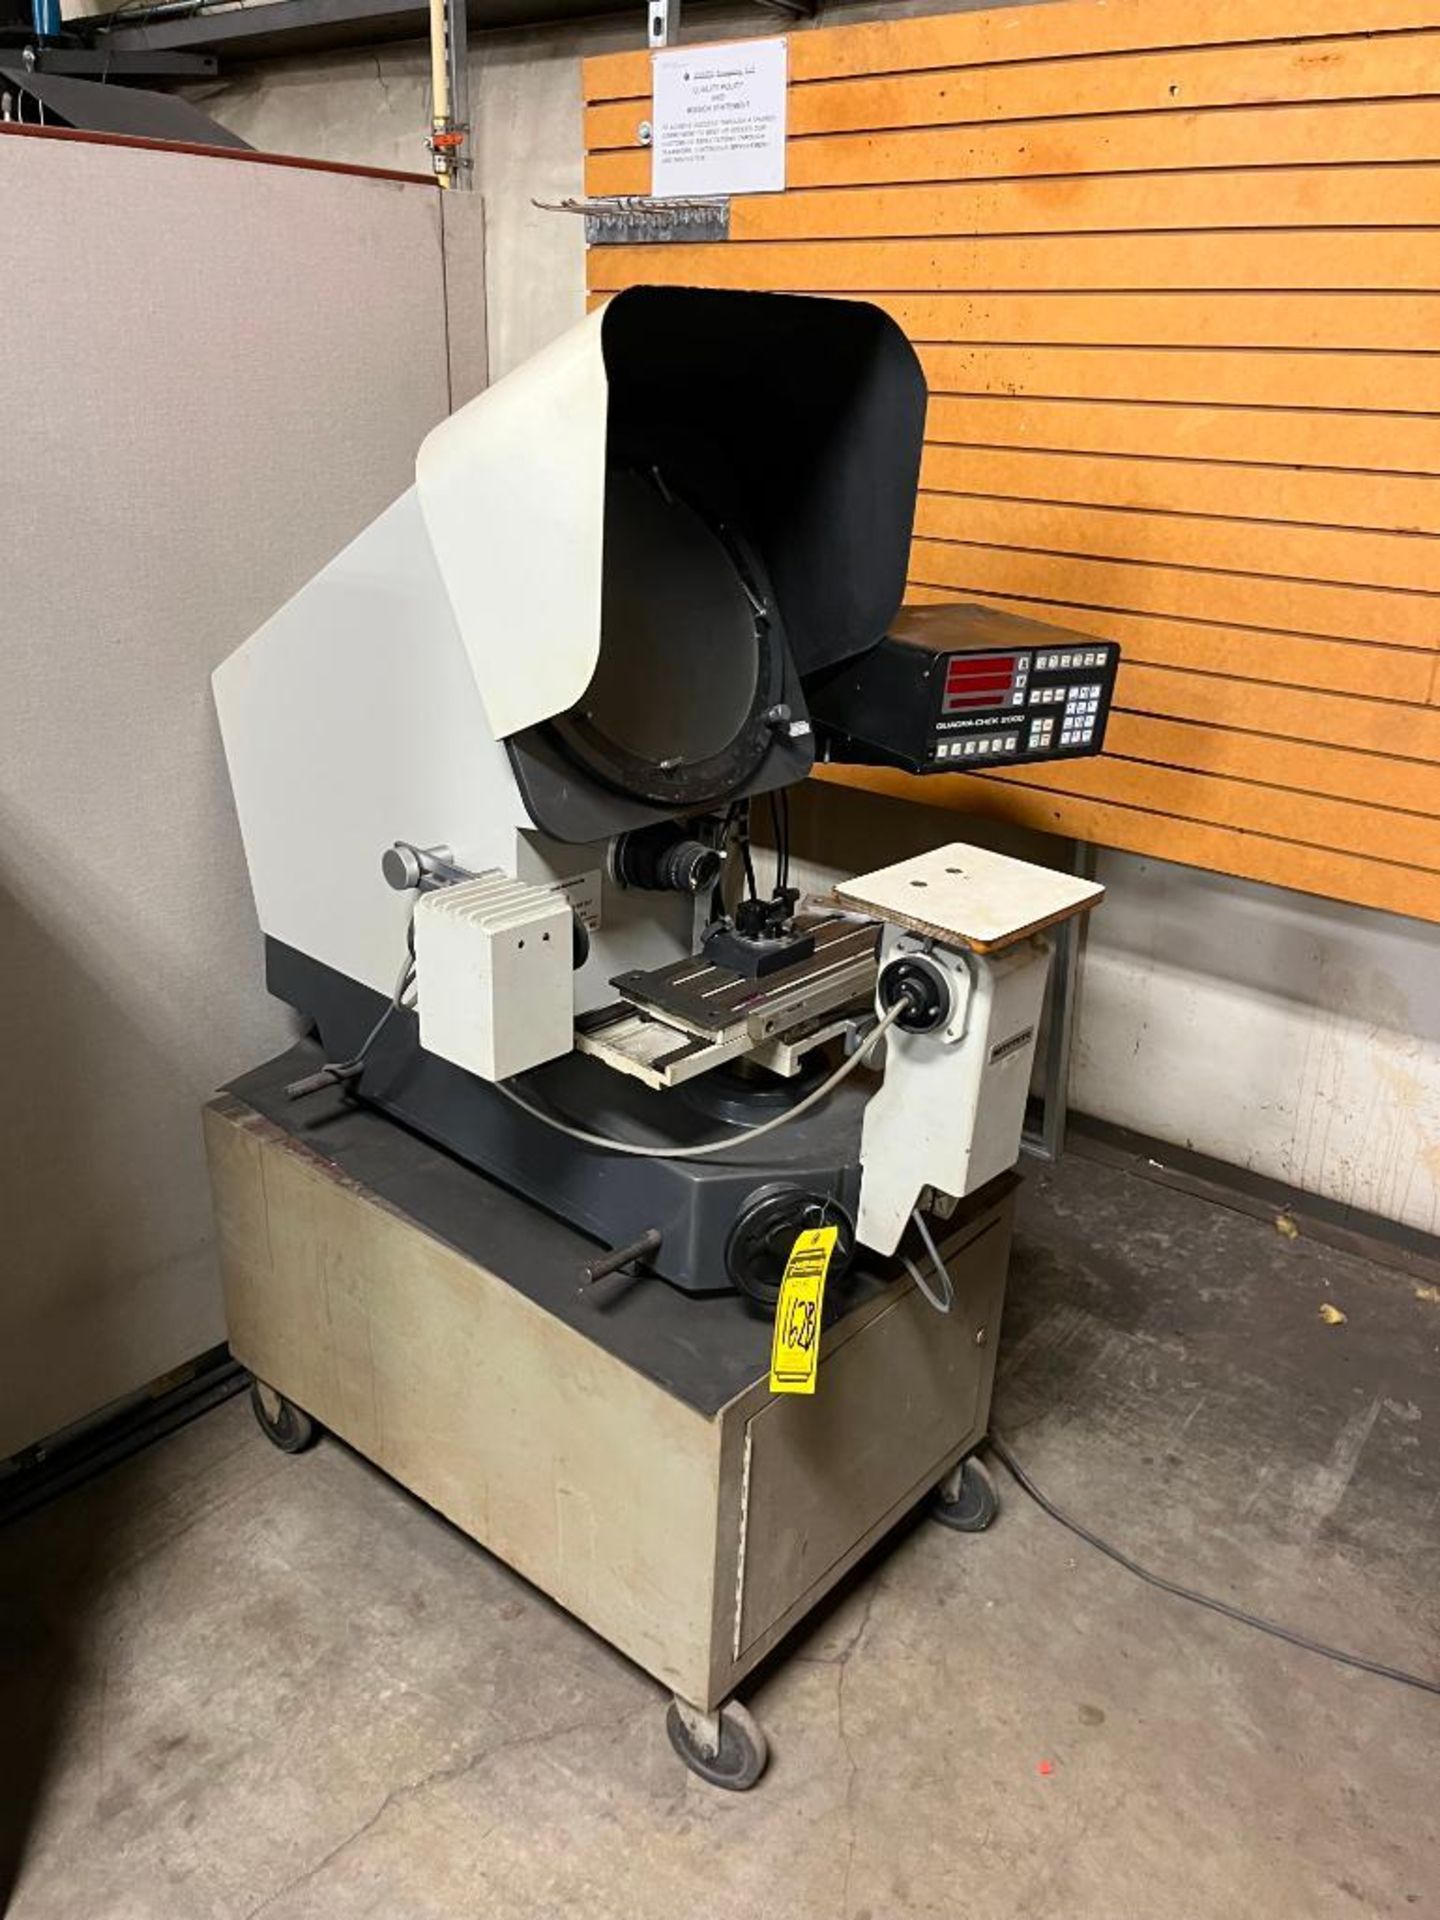 Certified Comparator Products Refurbished Mitutoyo Optical Comparator, Type PH-350, C/N 162-101, S/N